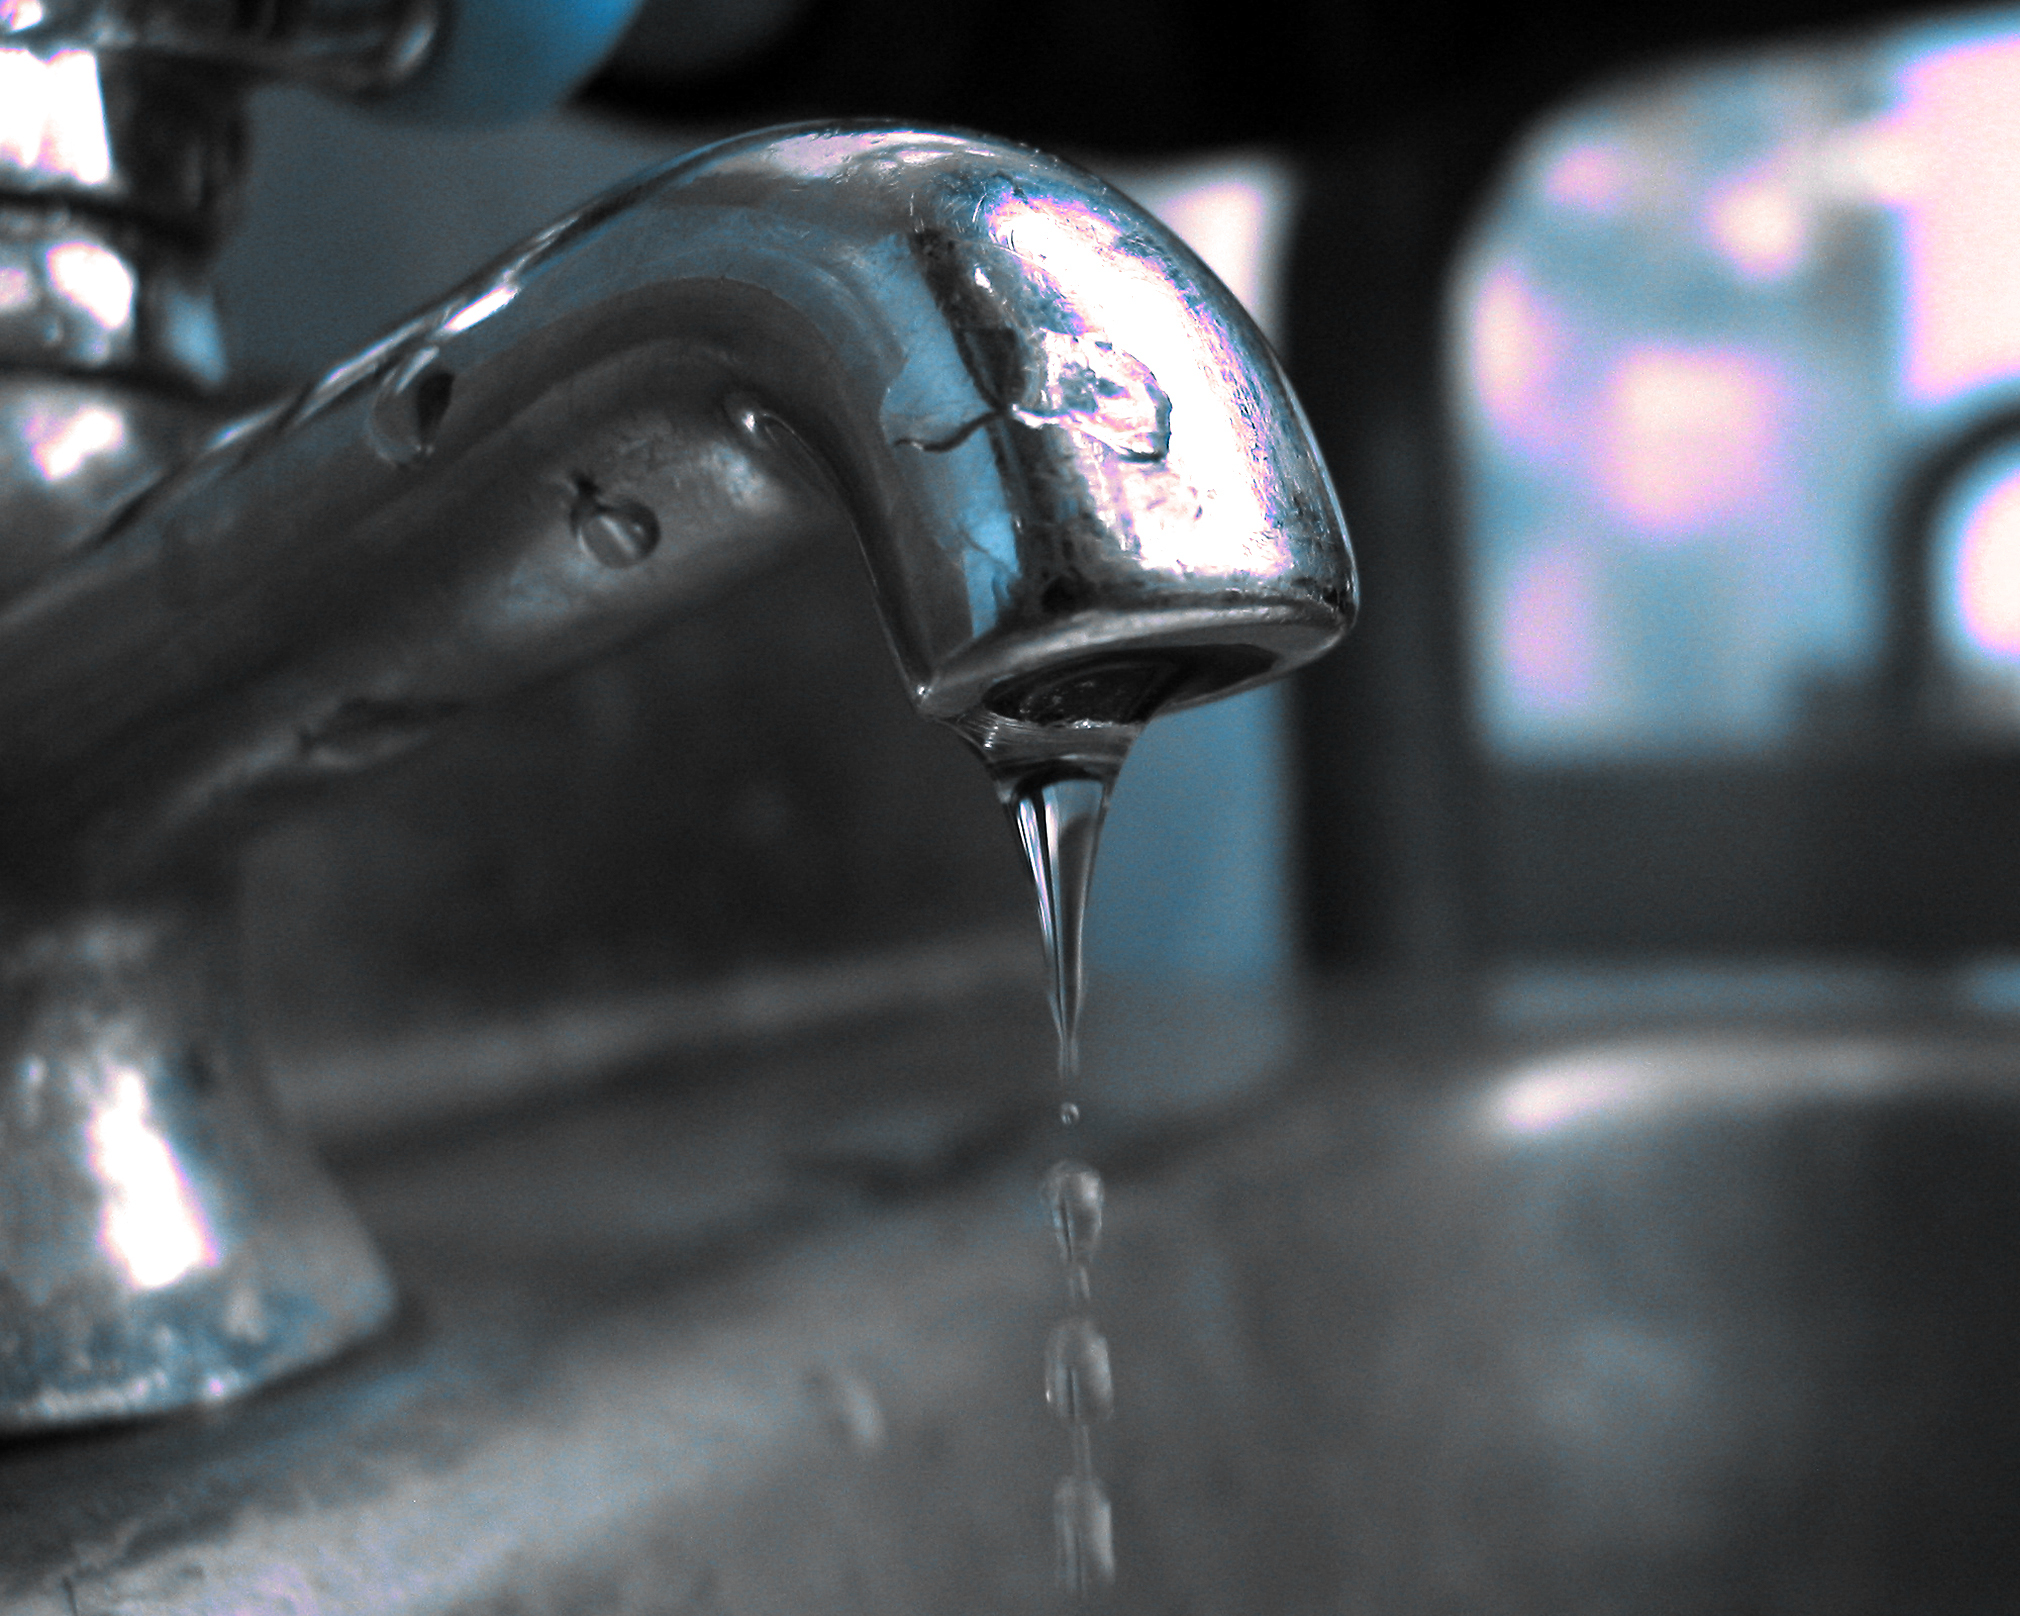 Why It's Important to Fix Leaky Faucets